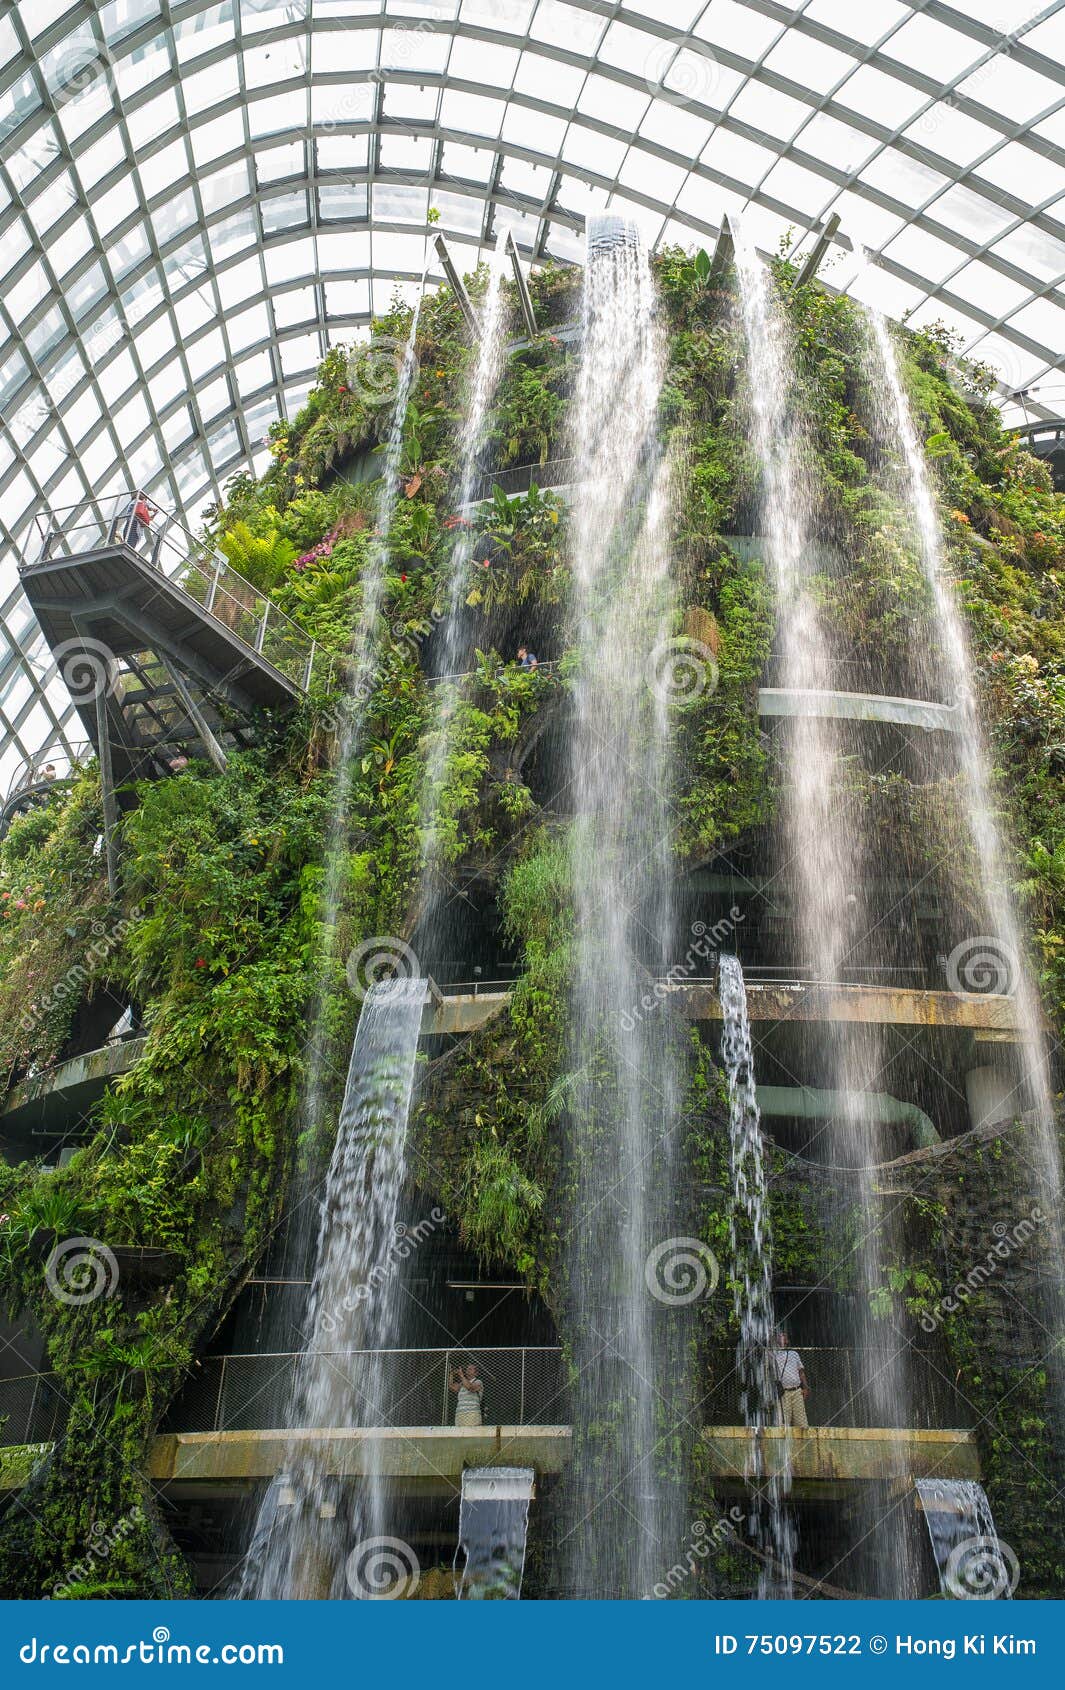 Tropical Forest Of Botanic Garden Singapore 1 Editorial Photography Image Of Architecture Nature 75097522